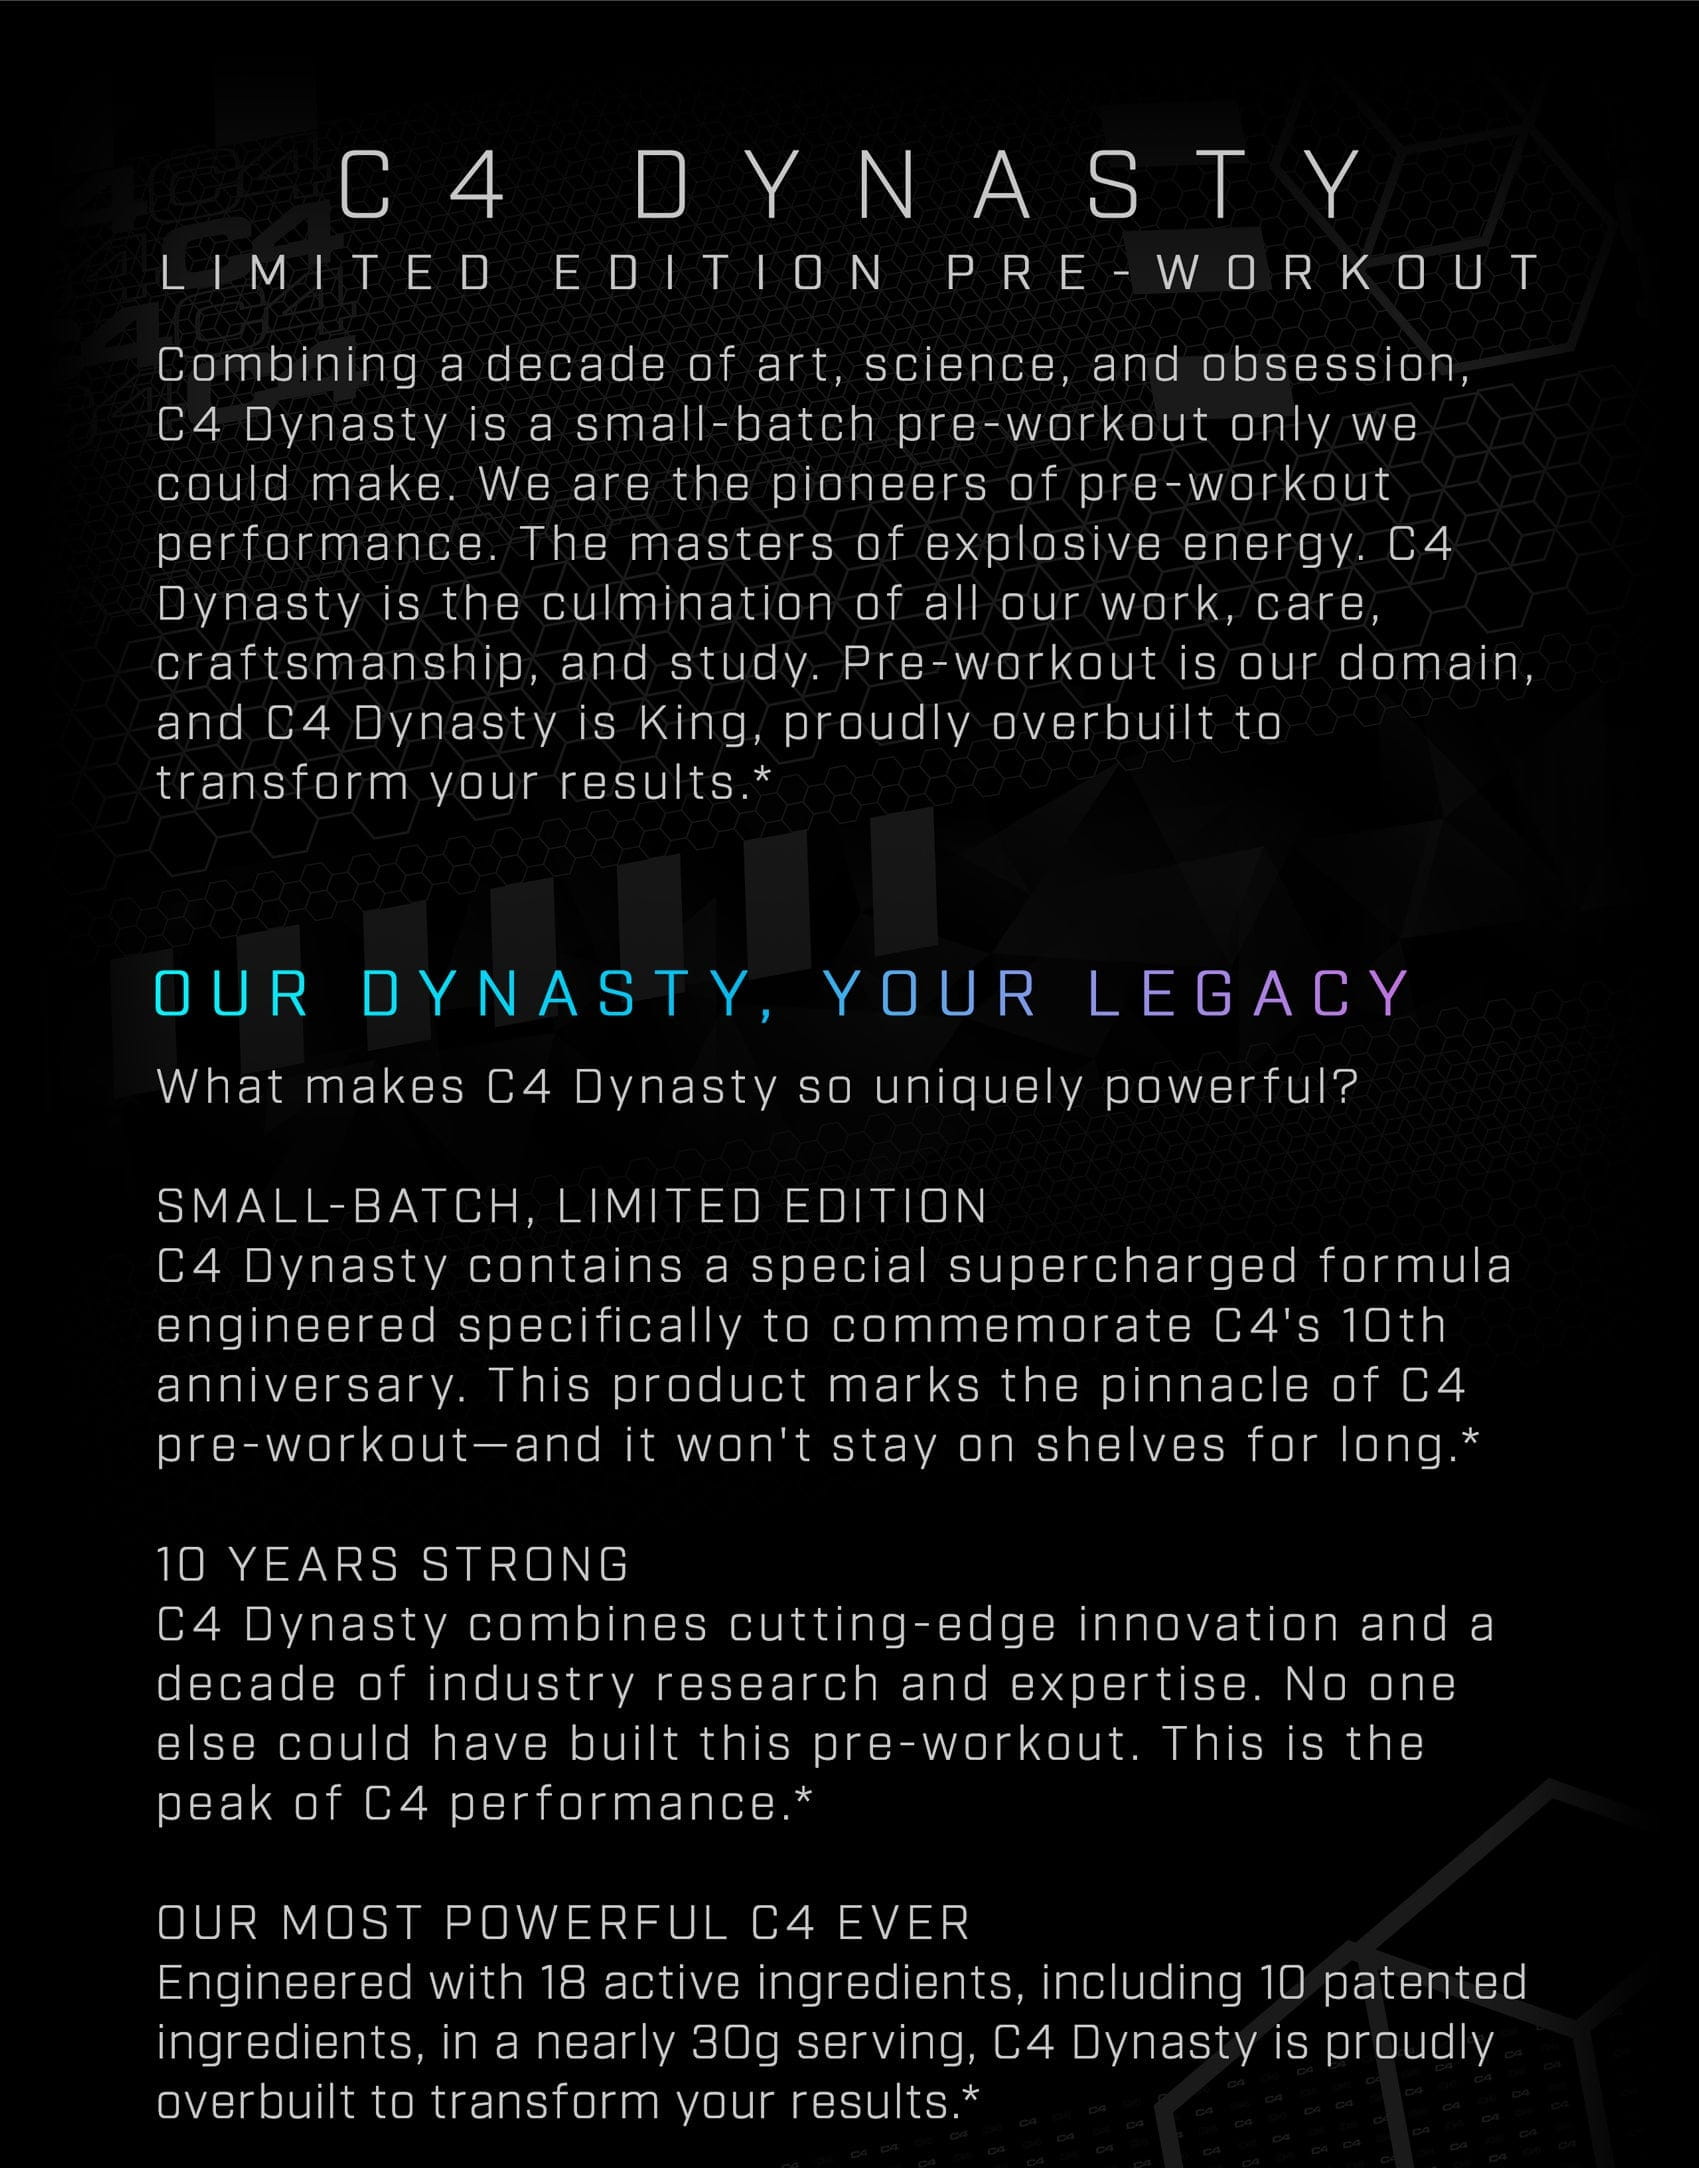 c4 dynasty mmx limited edition black label pre workout View 3